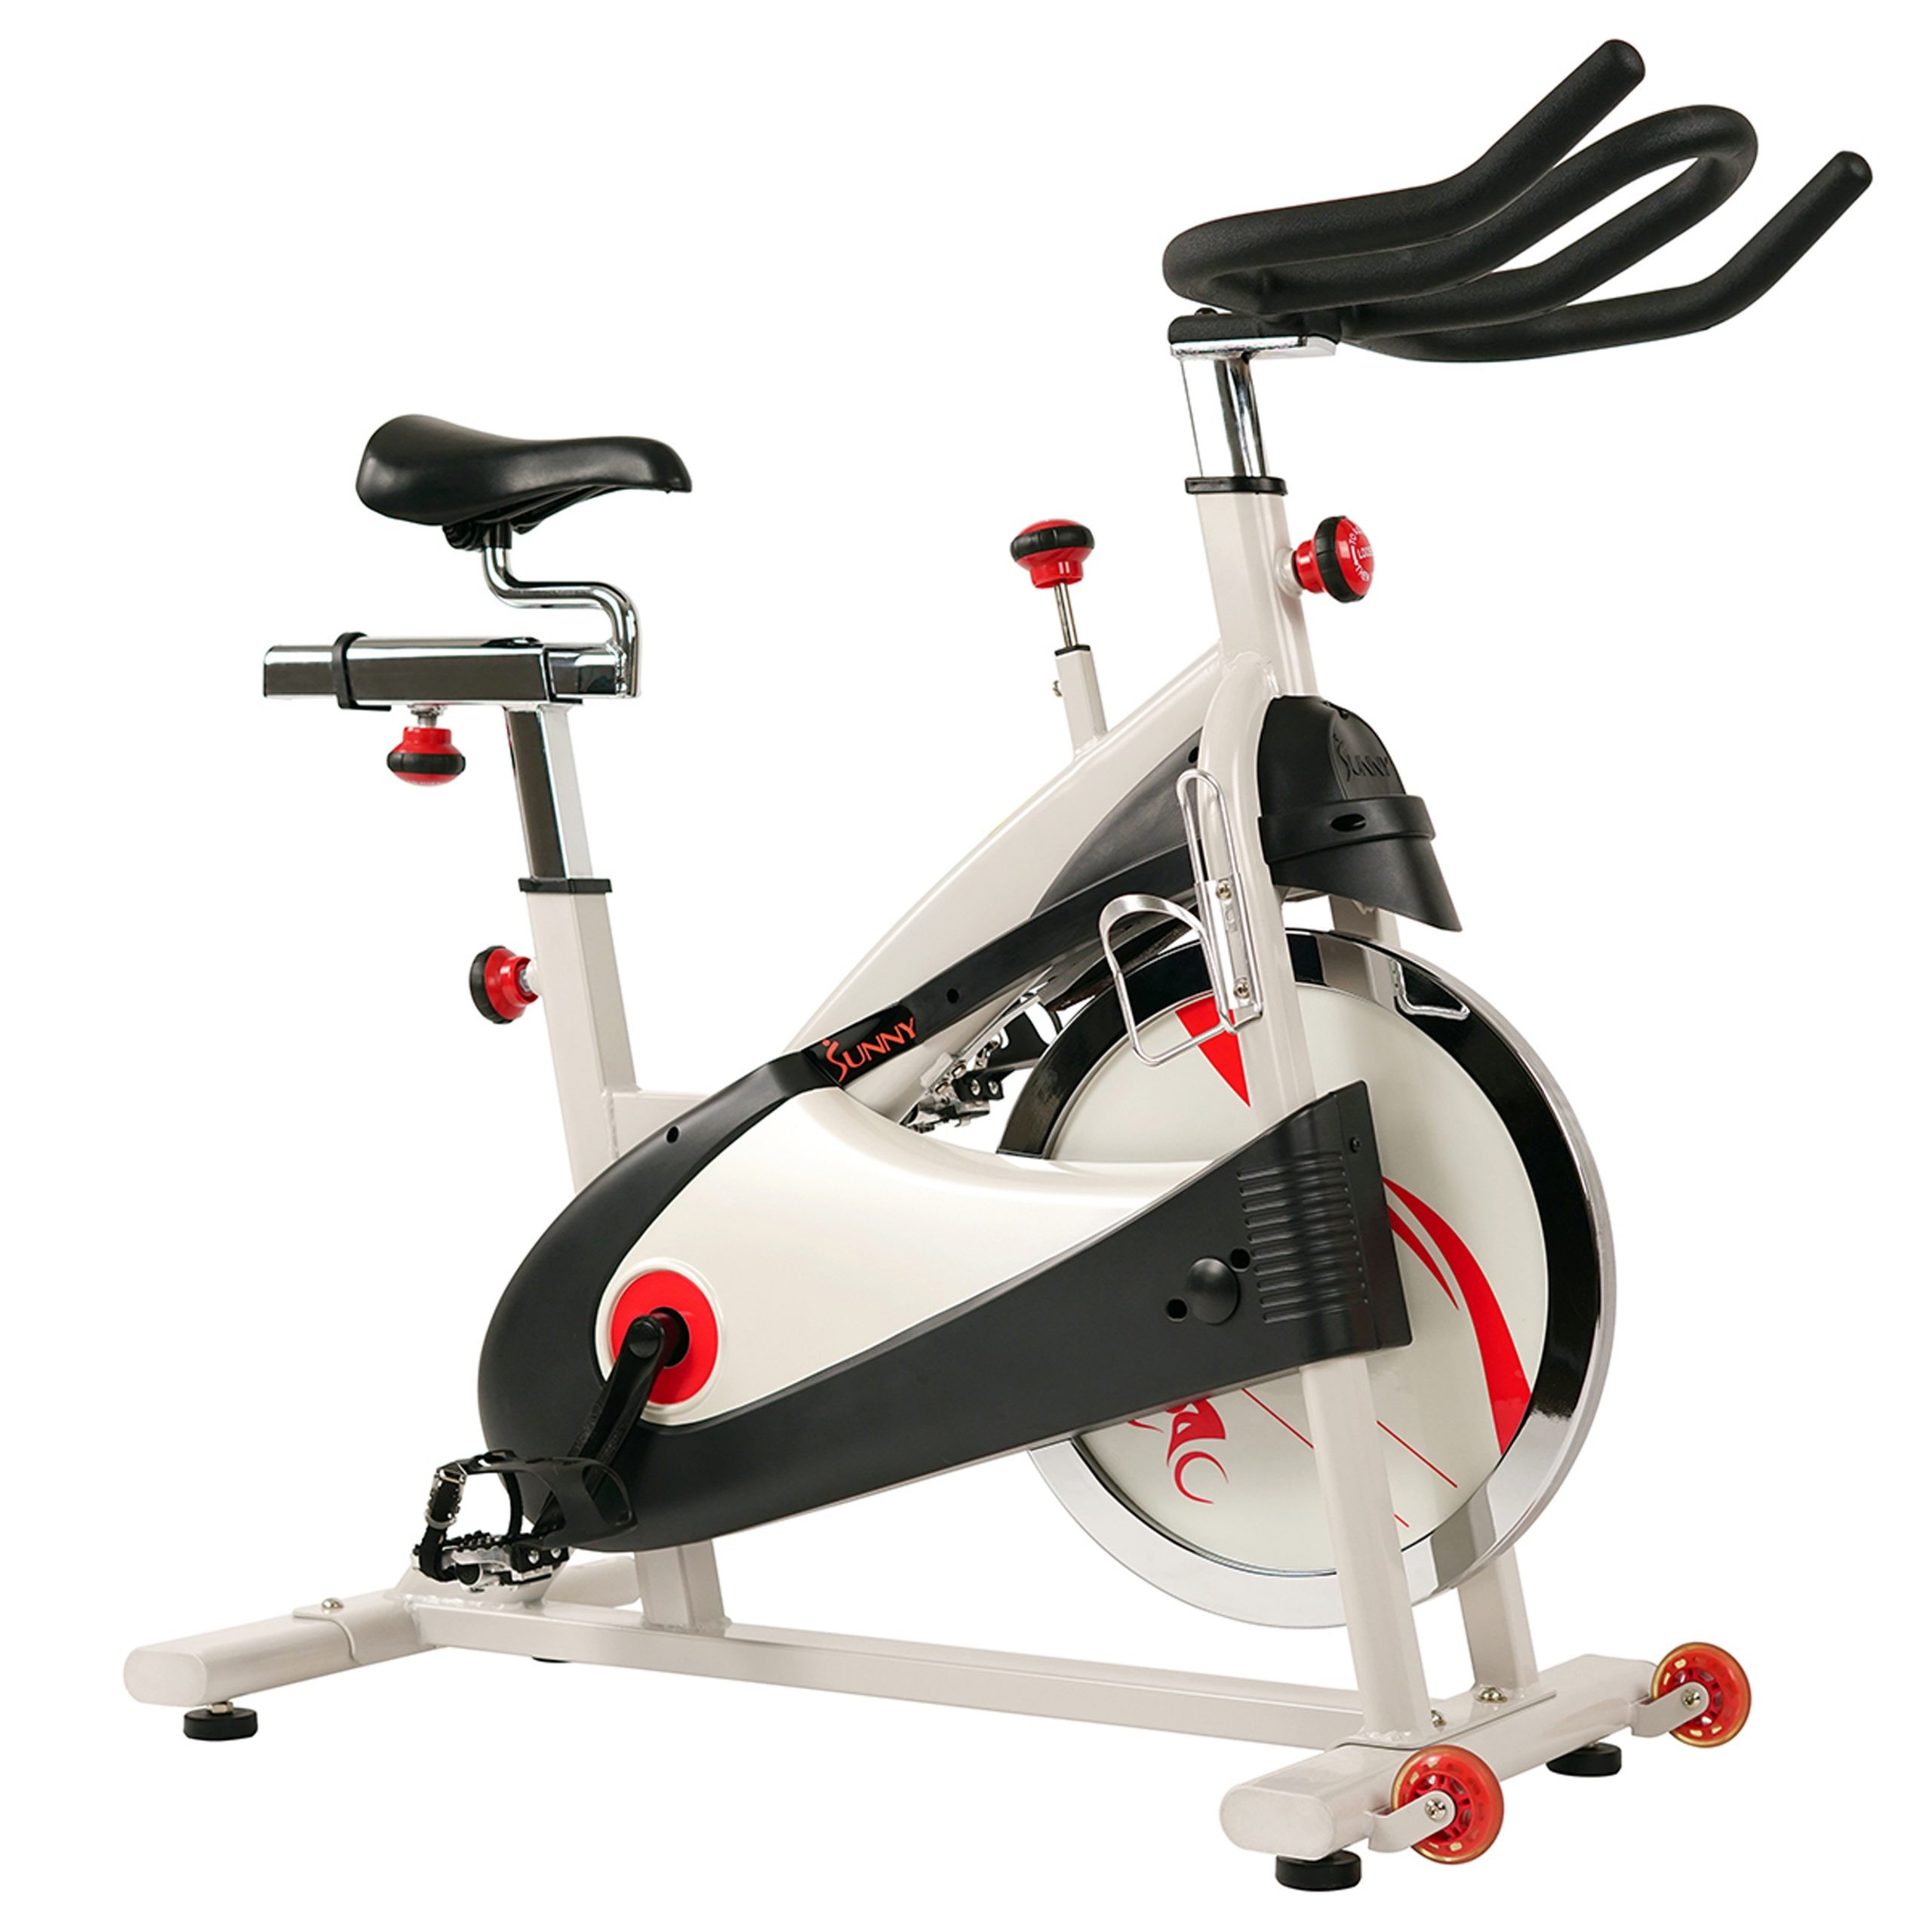 Sunny Health & Fitness 40lb Flywheel Belt Drive Indoor Cycle Bike w/ Clipped Pedals – SF-B1509